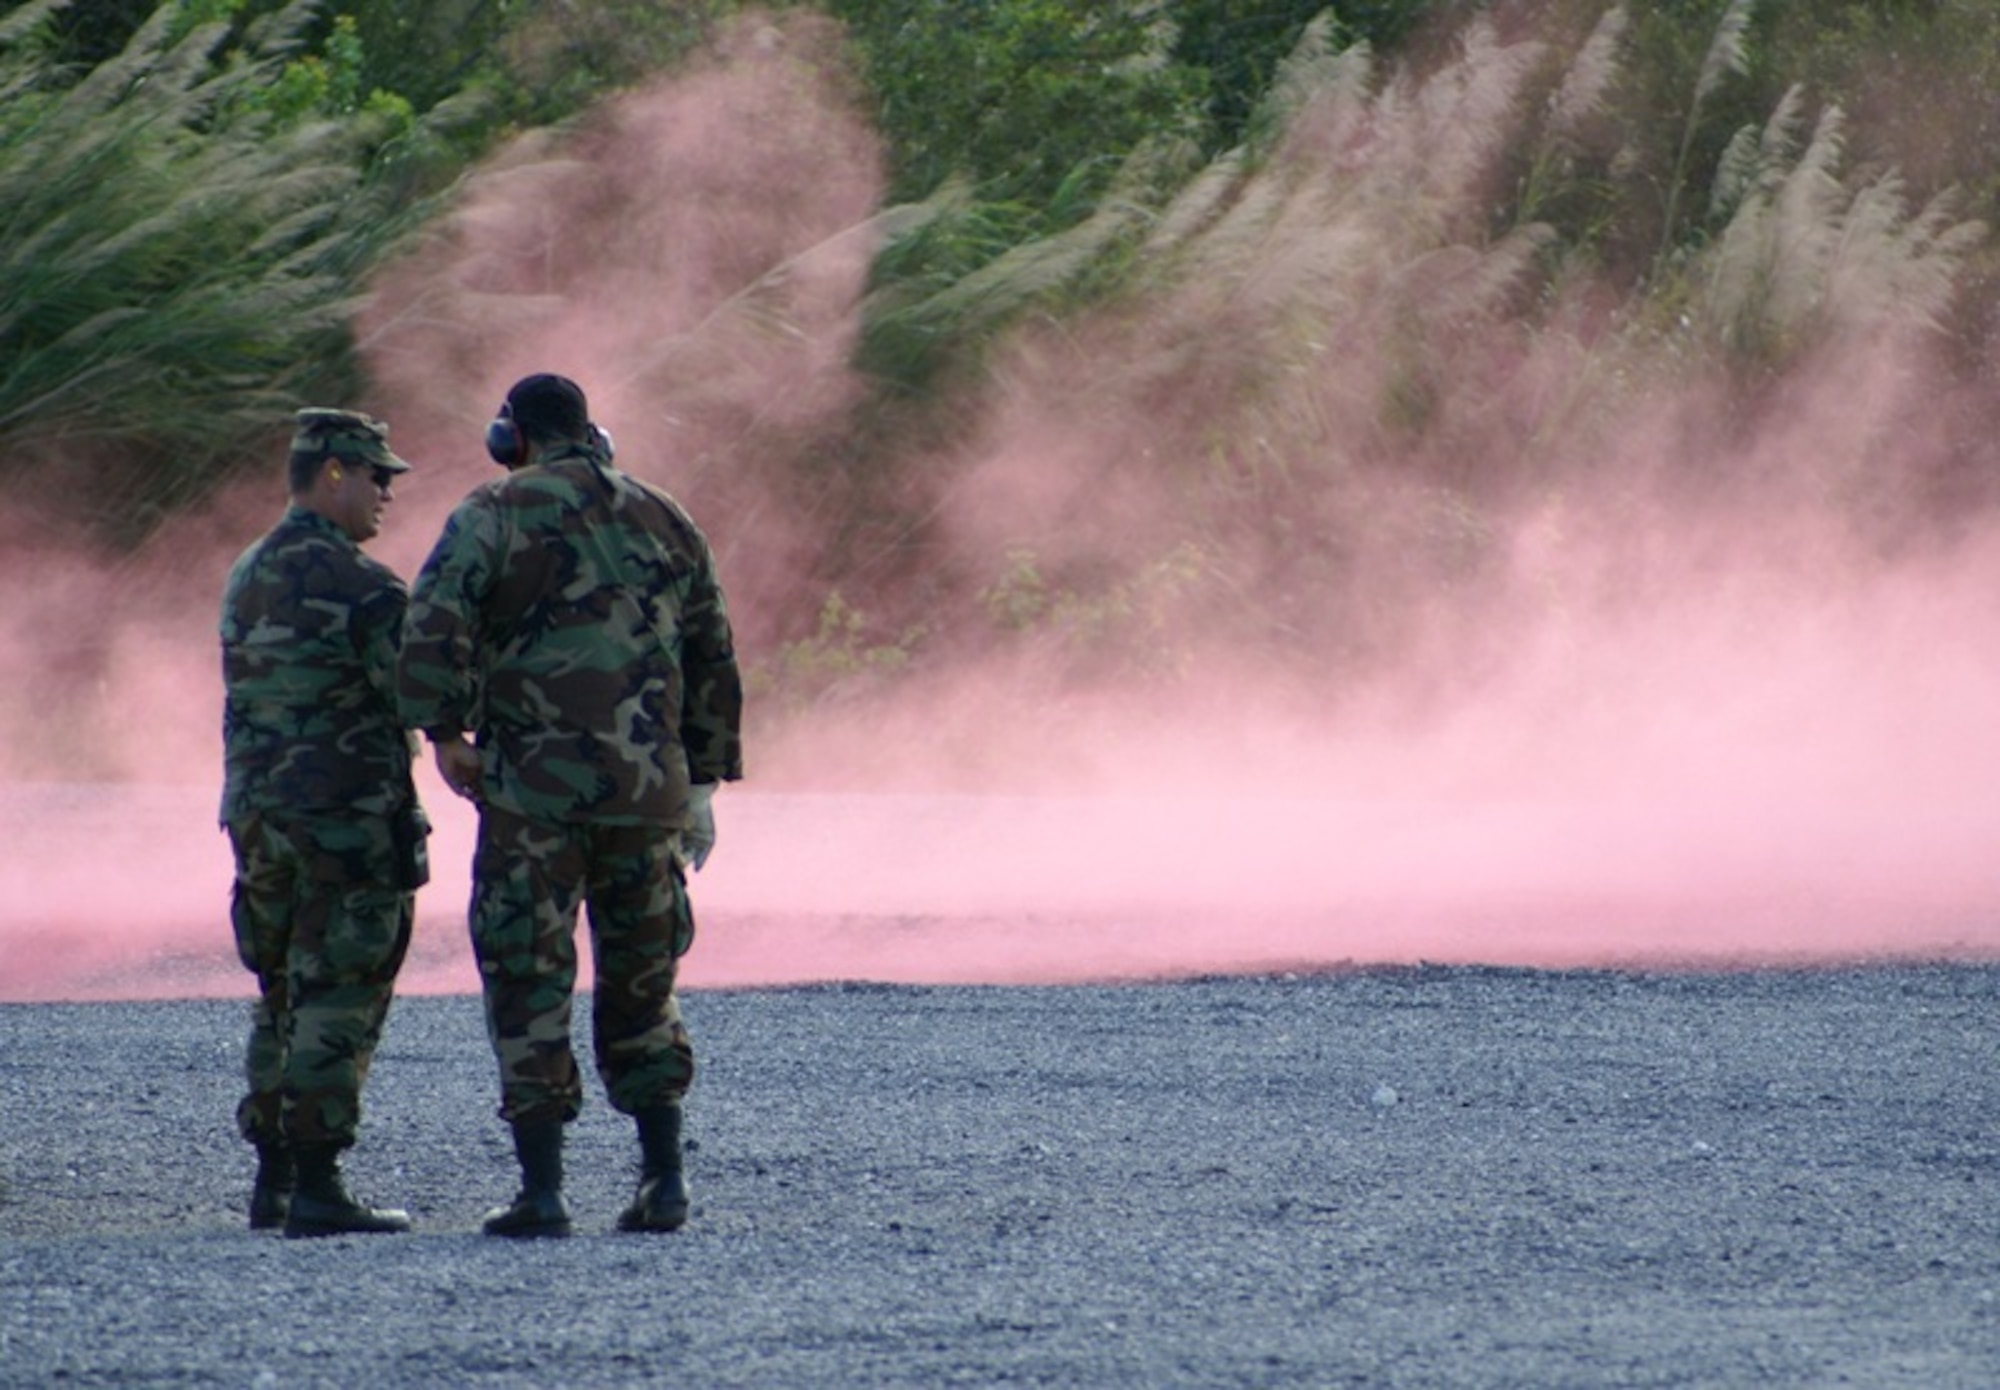 Master Sgt. James Raulerson, 482nd Civil Engineer Squadron’s Explosive Ordnance Disposal Flight technician (left), instructs Senior Master Sgt. Eddie Hodgson (right), 482nd Security Forces Squadron, on how to use smoke grenades and ground burst simulators on March 3. The instruction is in preparation for the upcoming base-wide Operational Readiness Exercise set for March 8-11. The simulators will create blasting noises and smoke for the realistic scenarios that reservists will encounter during the exercise. “Homestead Air Reserve Base goes to great lengths to ensure safety procedures are established and followed during exercises to prepare our reservists for deployment,” said Mr. Sean Quinn, 482nd Mission Support Group Emergency Management Office. (U.S. Air Force photo/Senior Airman Erik Hofmeyer)